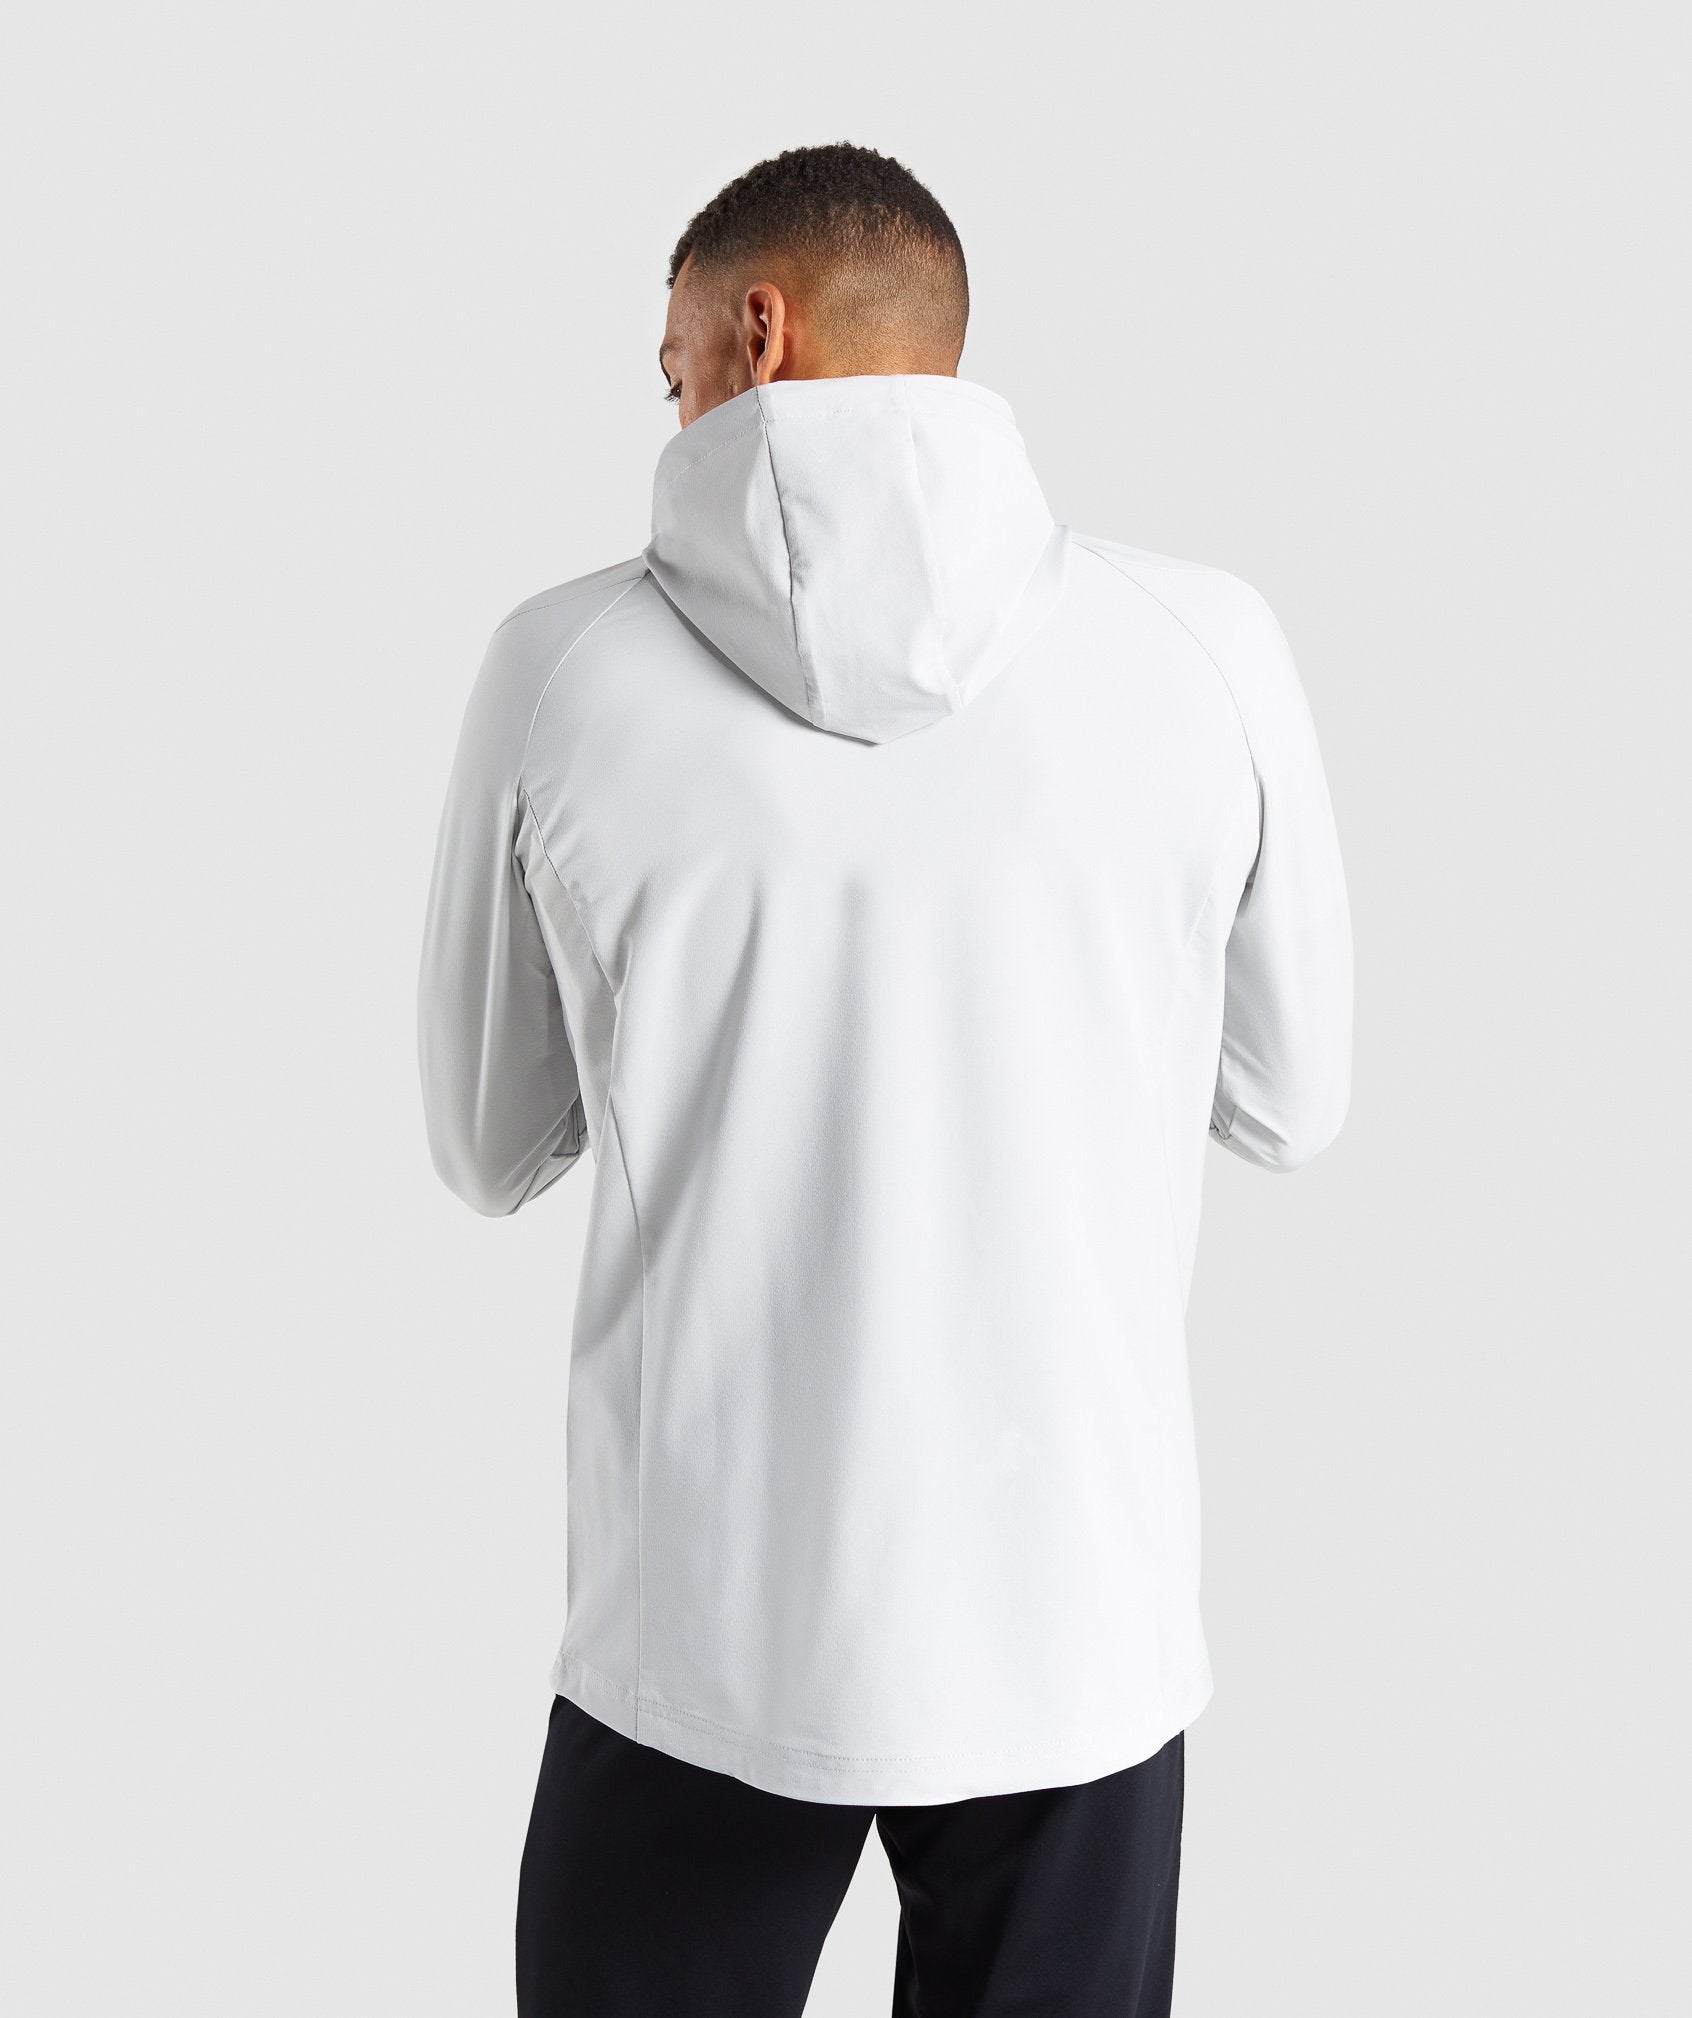 Pace Running Jacket in Wolf Grey - view 2